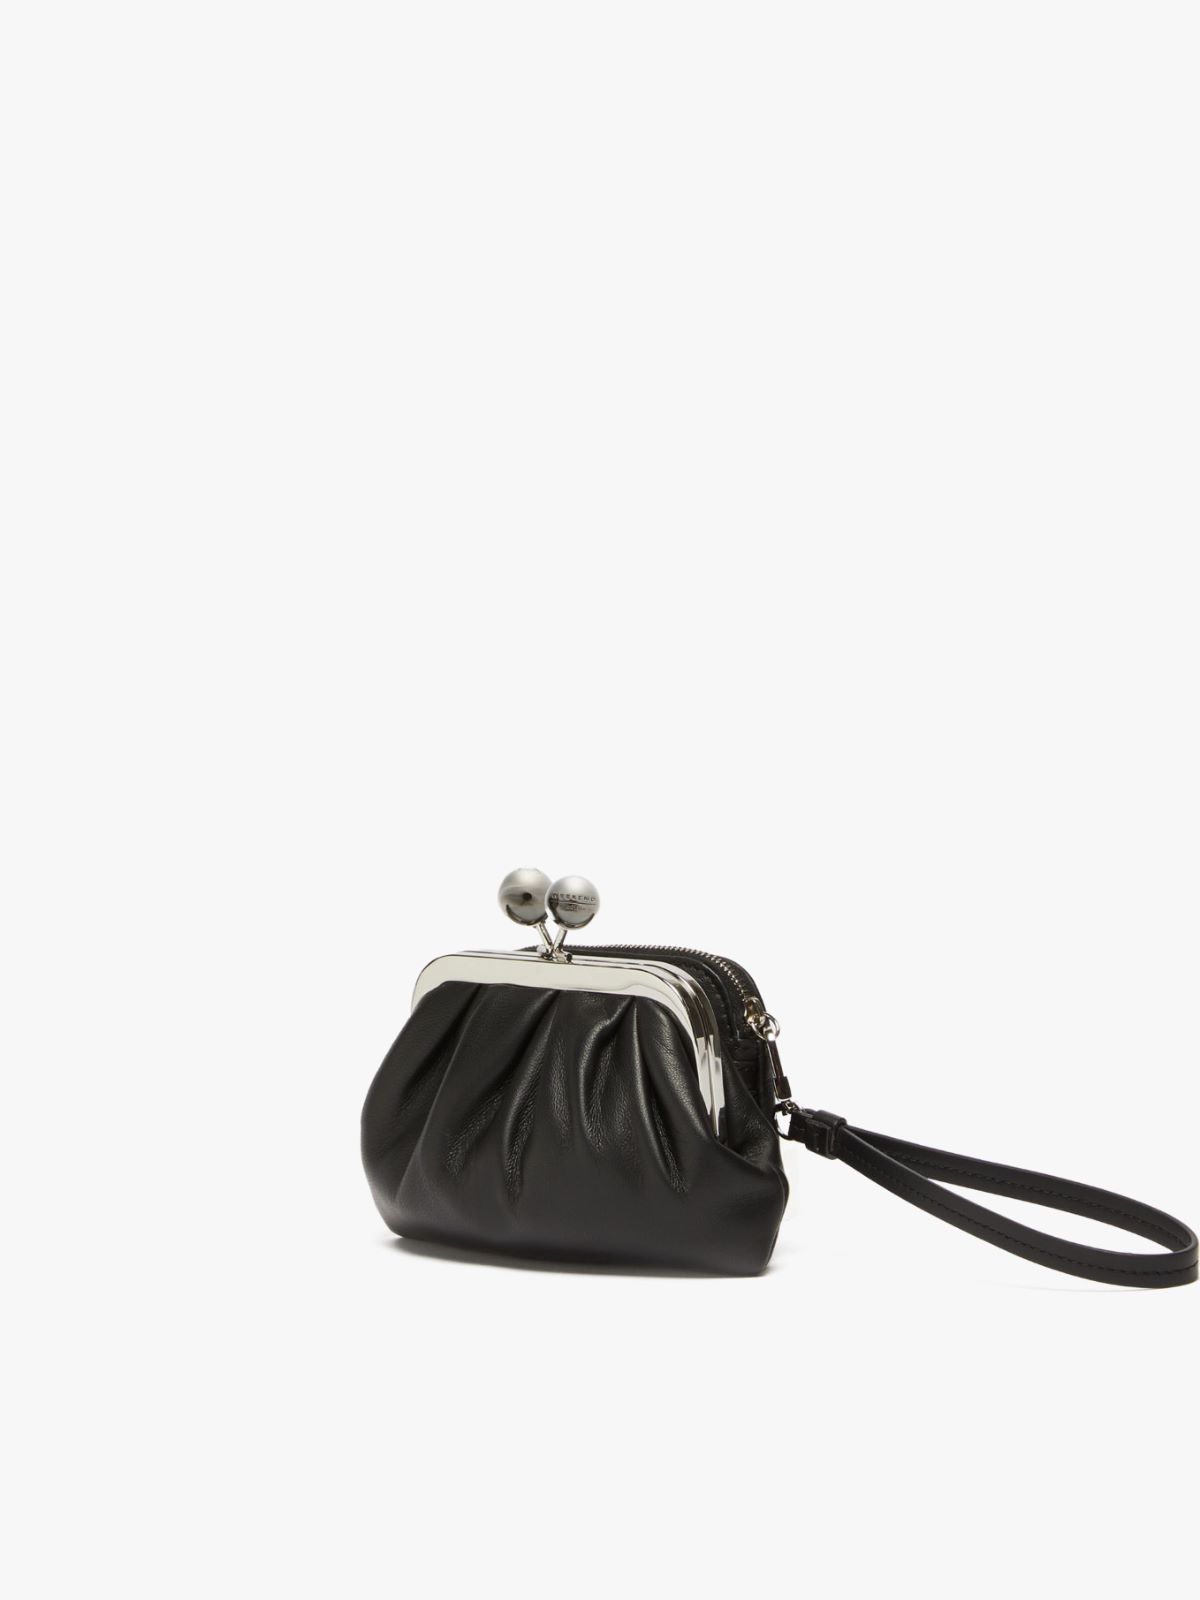 Pasticcino Bag wallet in nappa leather - BLACK - Weekend Max Mara - 2